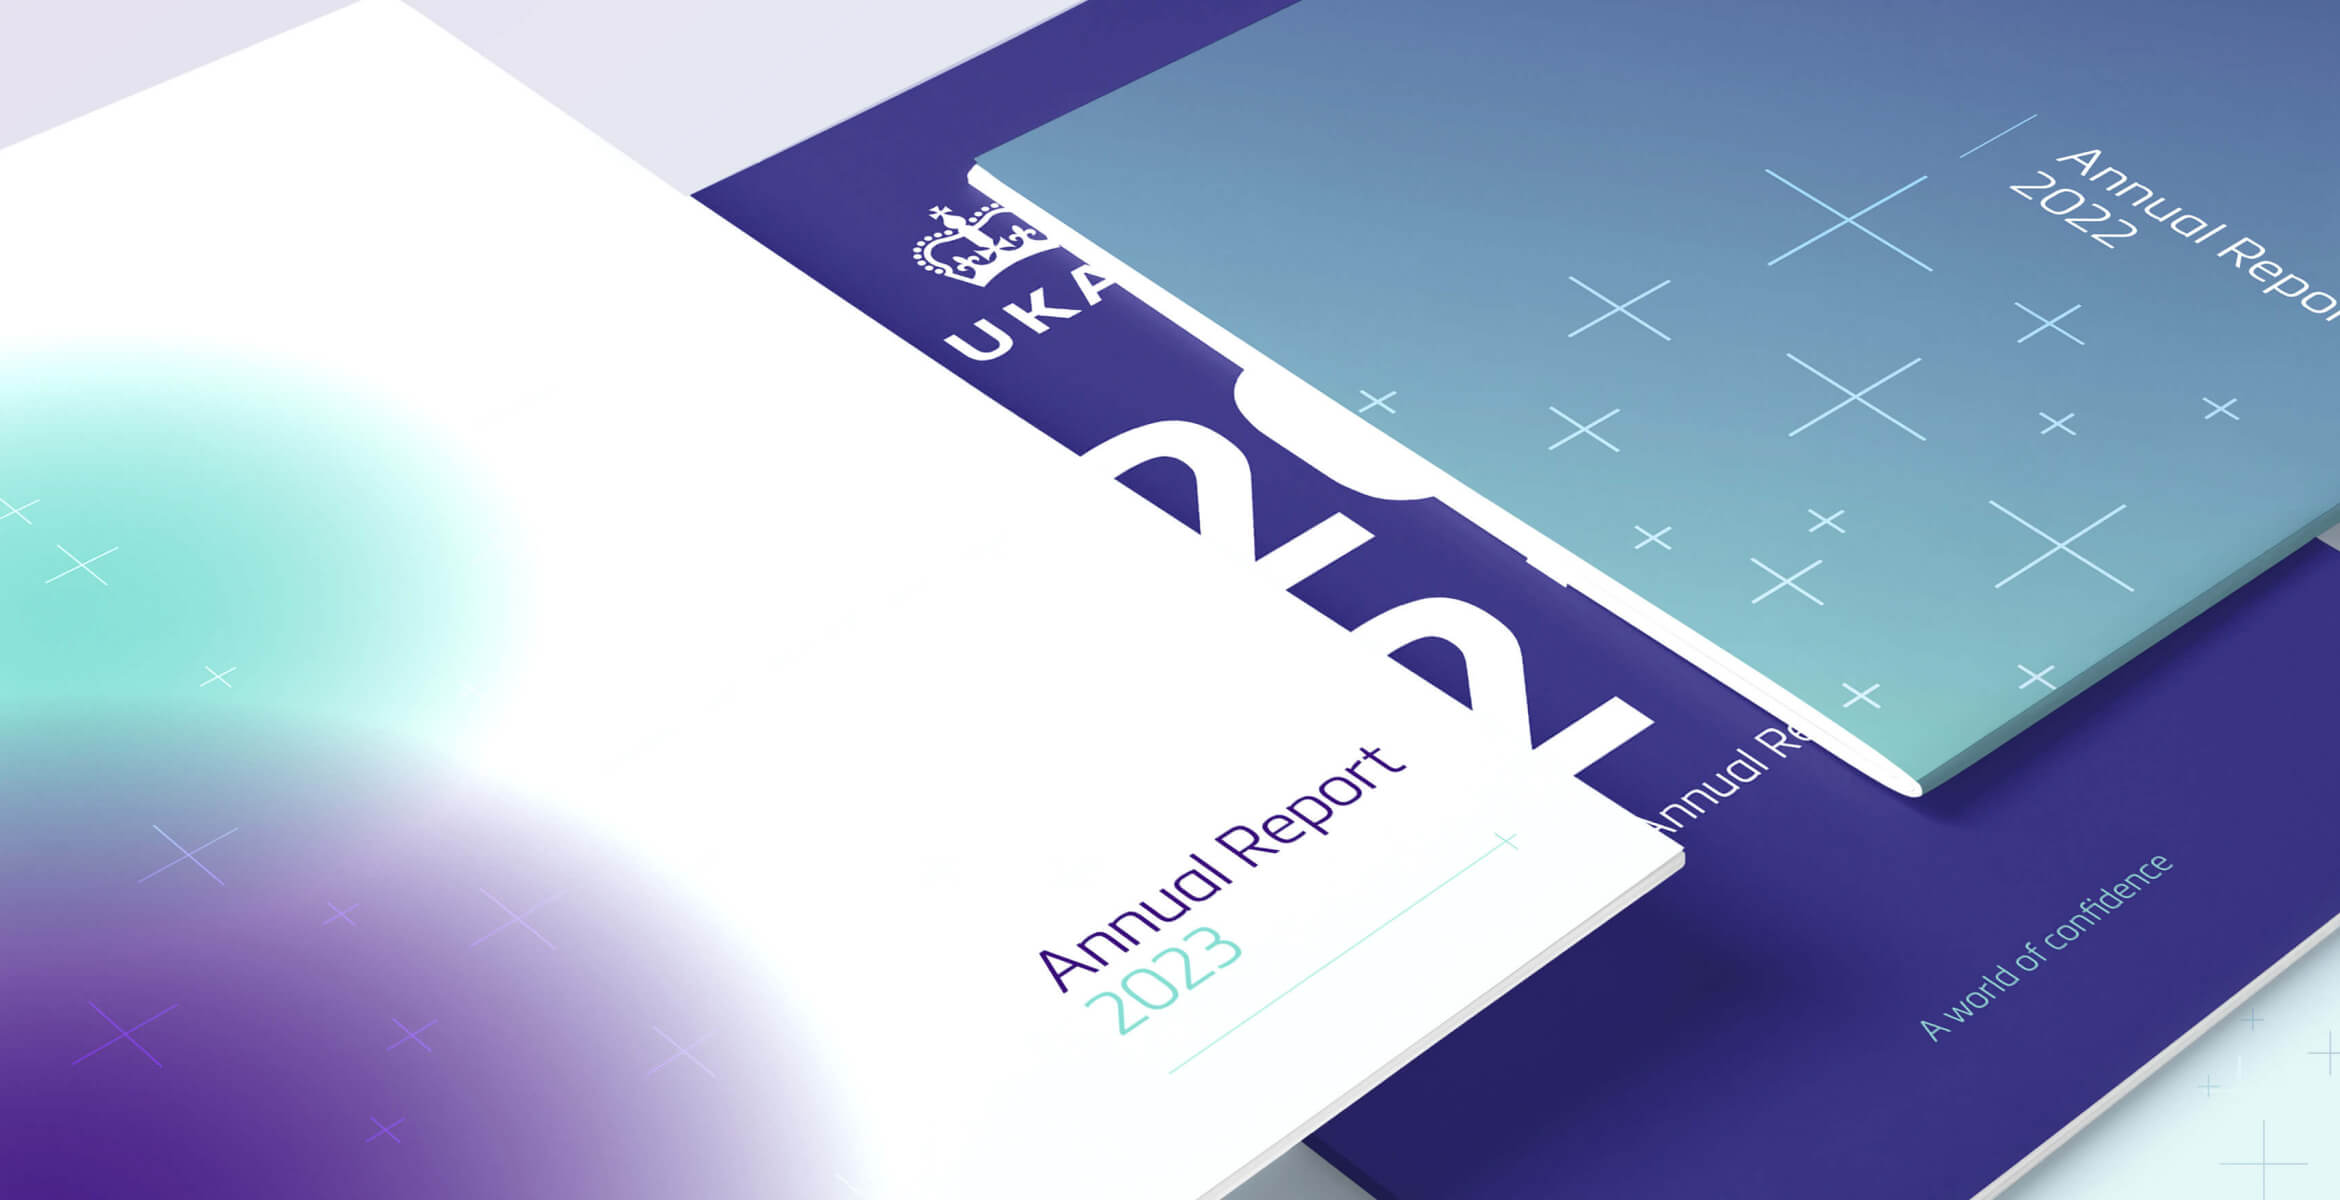 Three annual reports with UKAS branded front cover